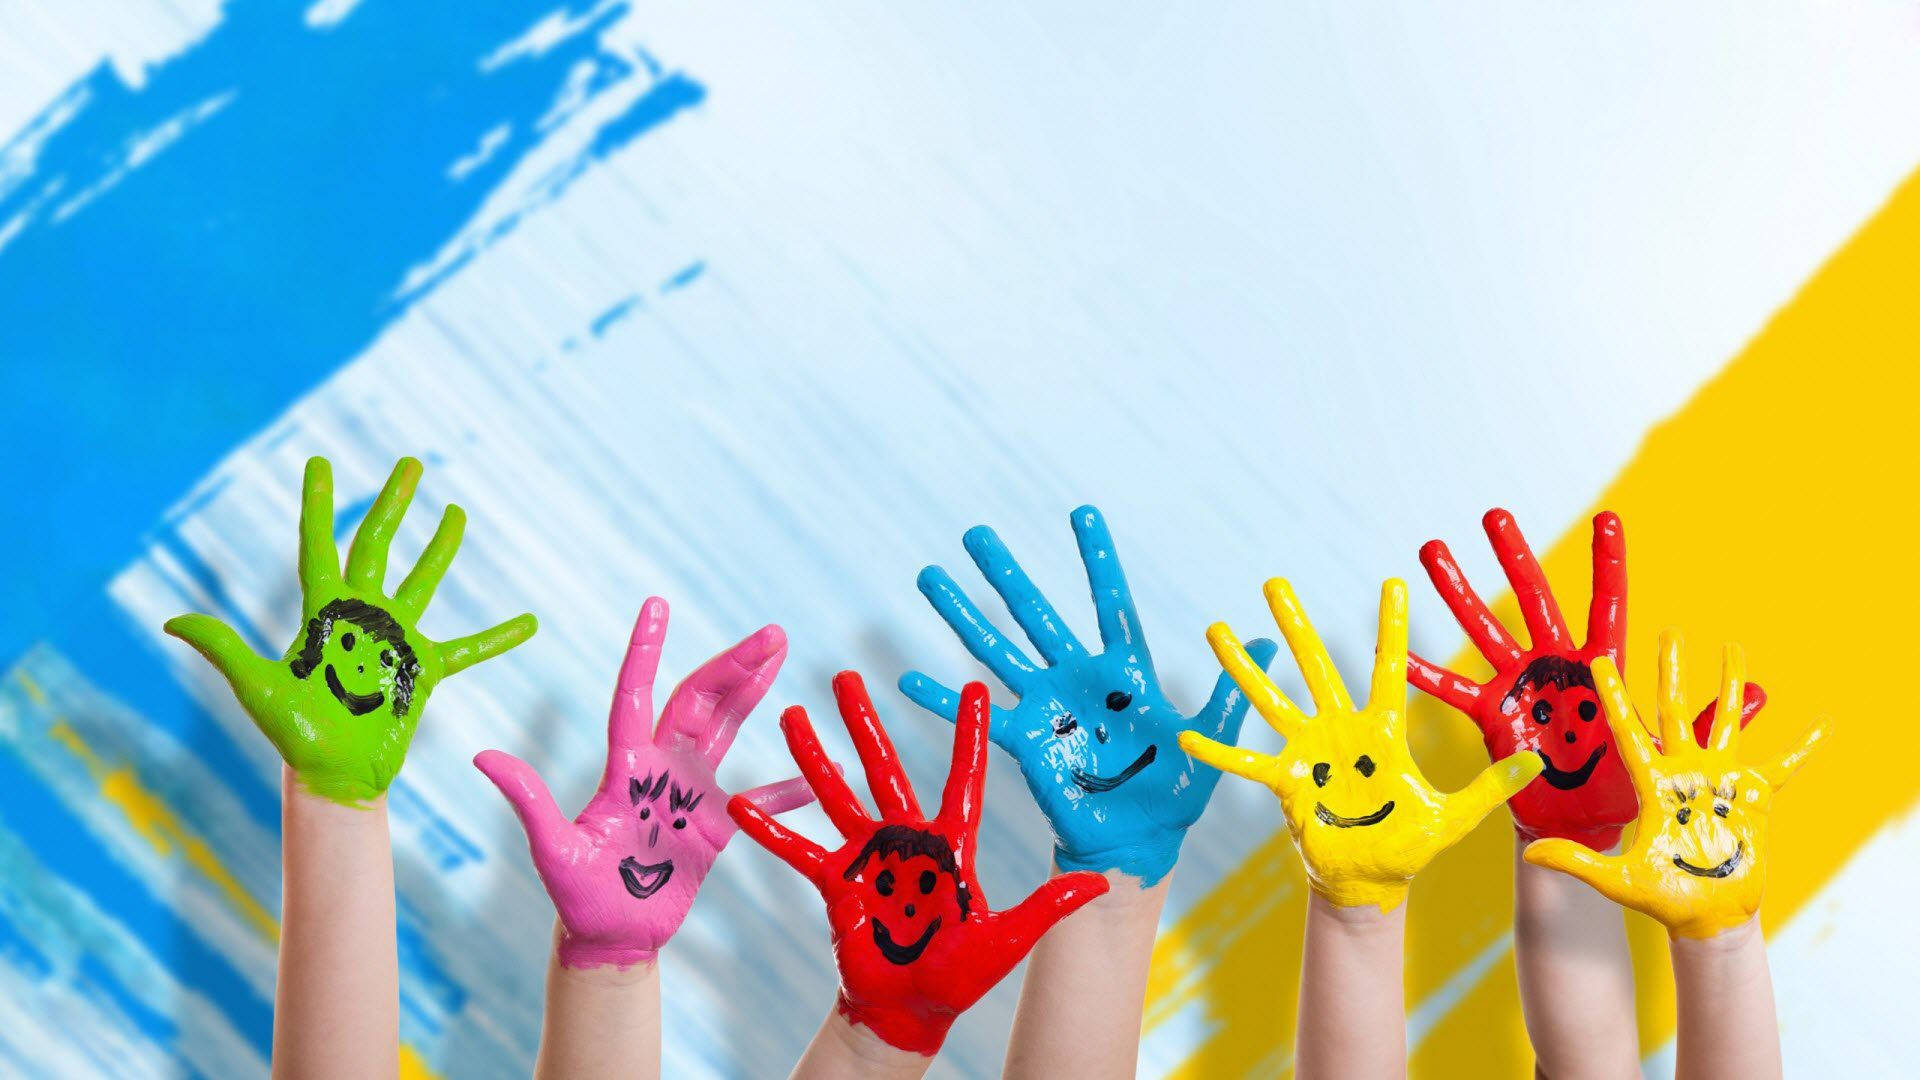 Painted Children's Hands With Happy Faces